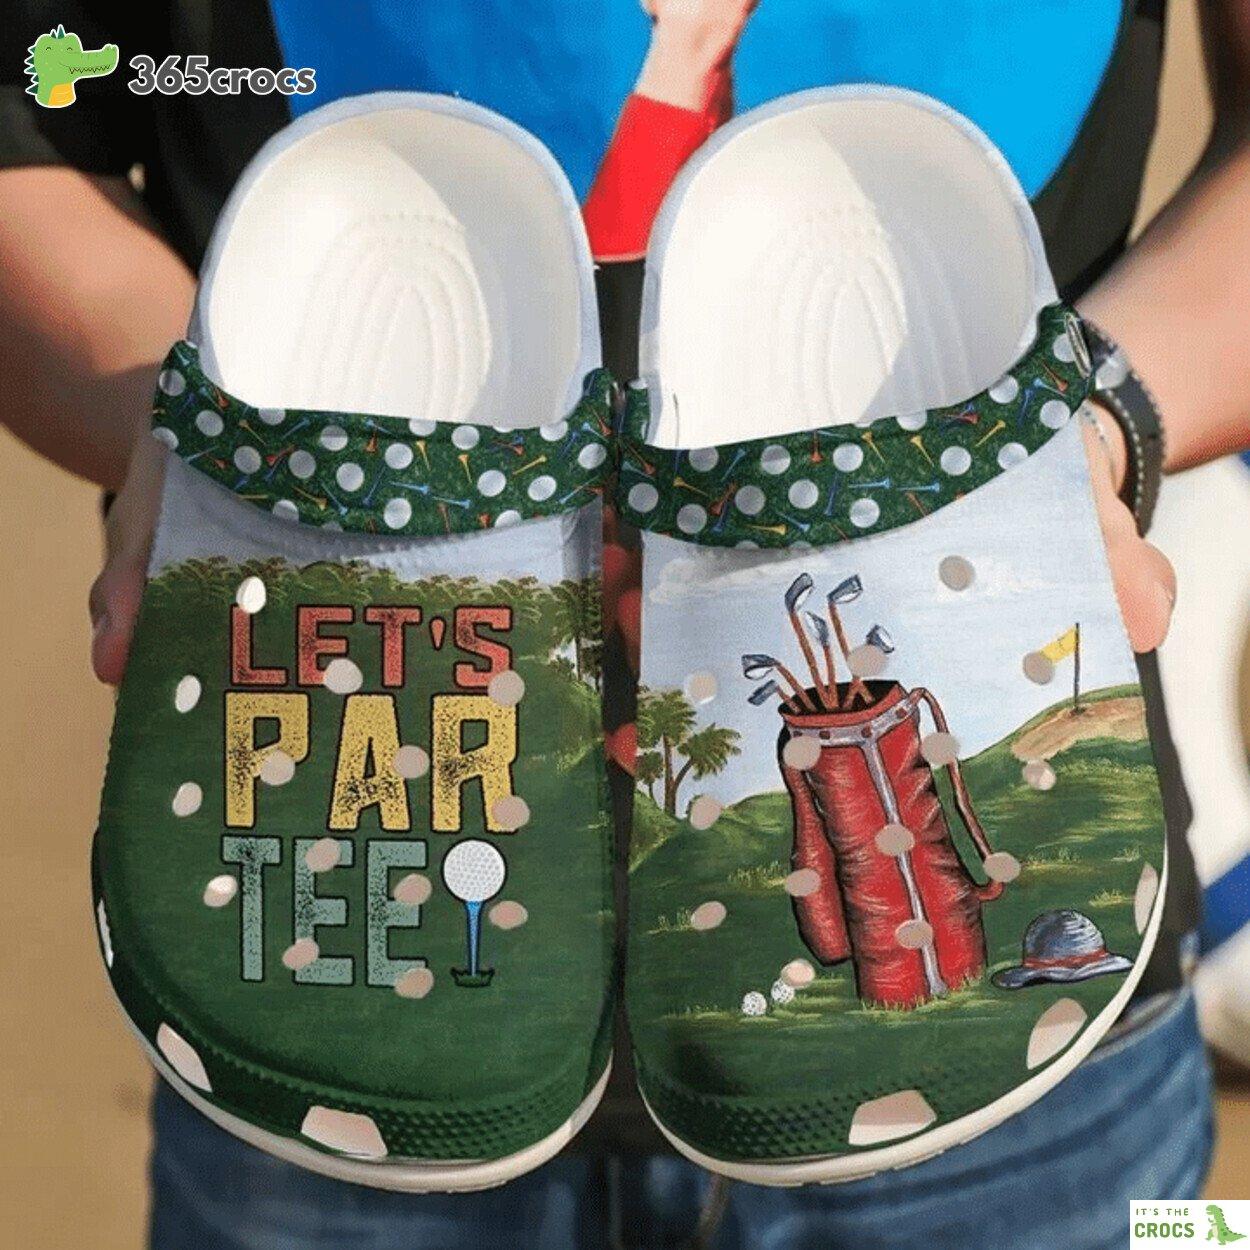 Golf Inspired Lets ParTee Themed Clog Shoes Sports Enthusiast Design